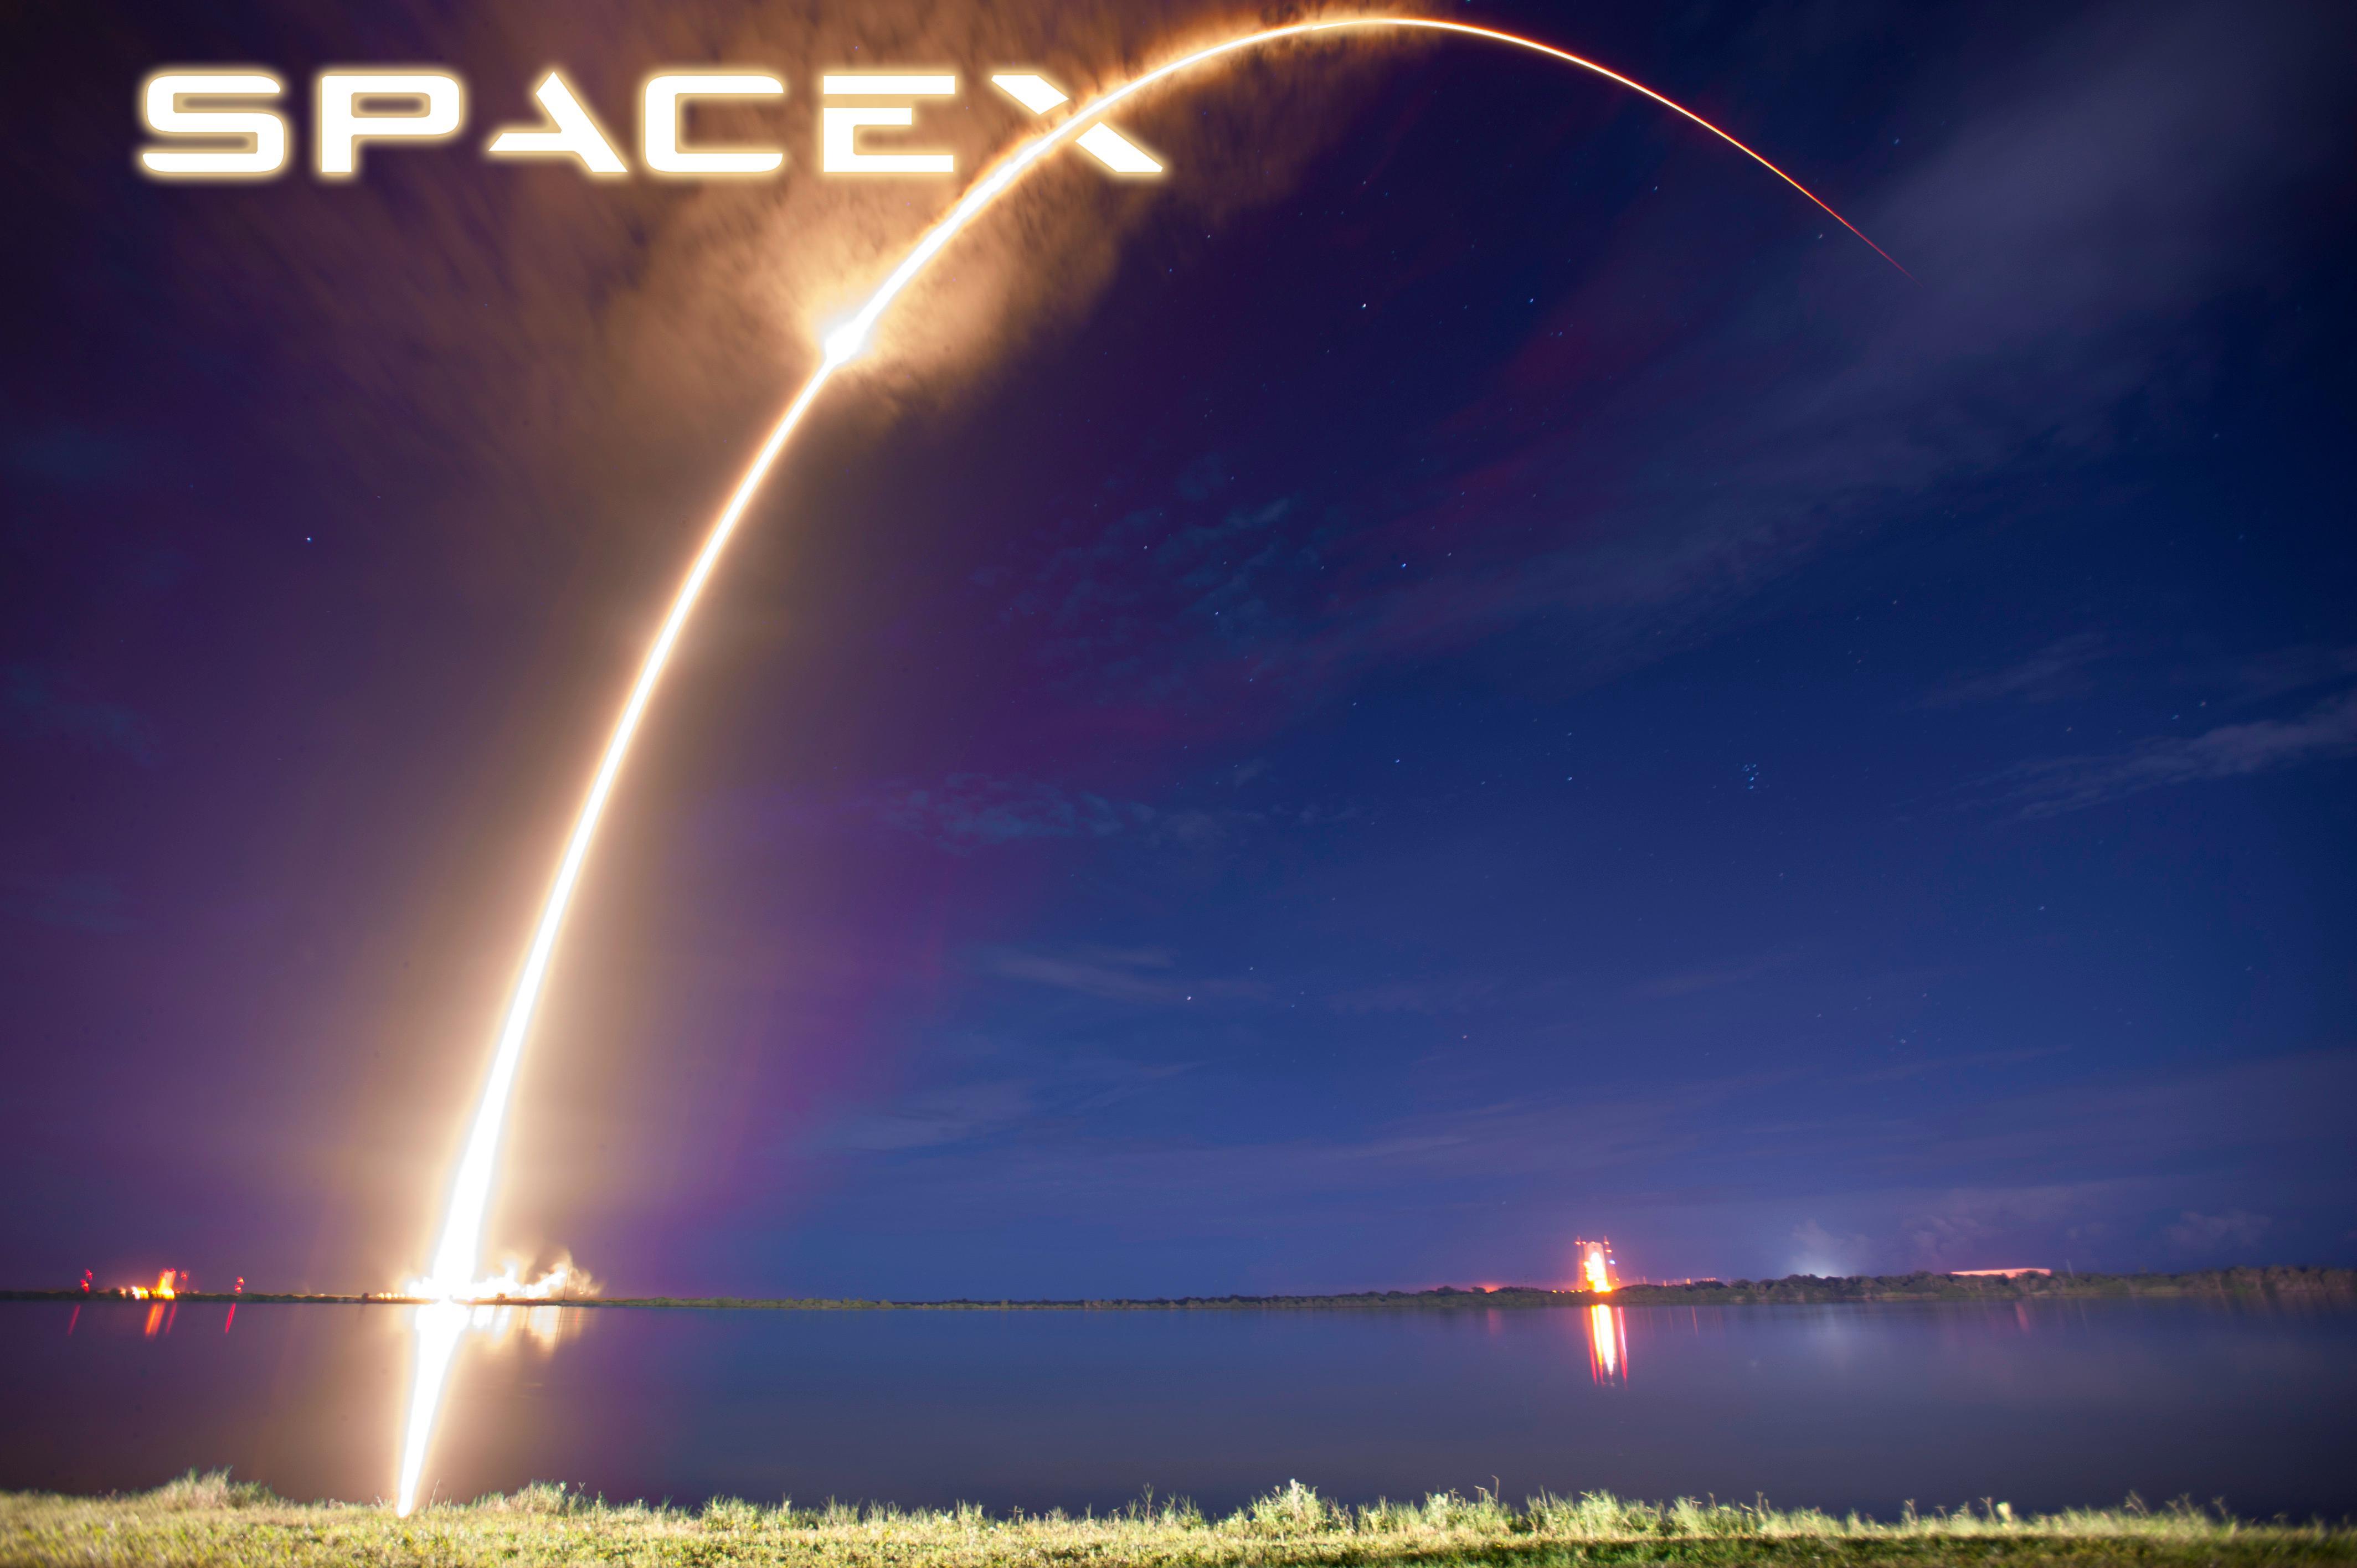 I noticed the Space X logo matches exactly with the Falcon 9